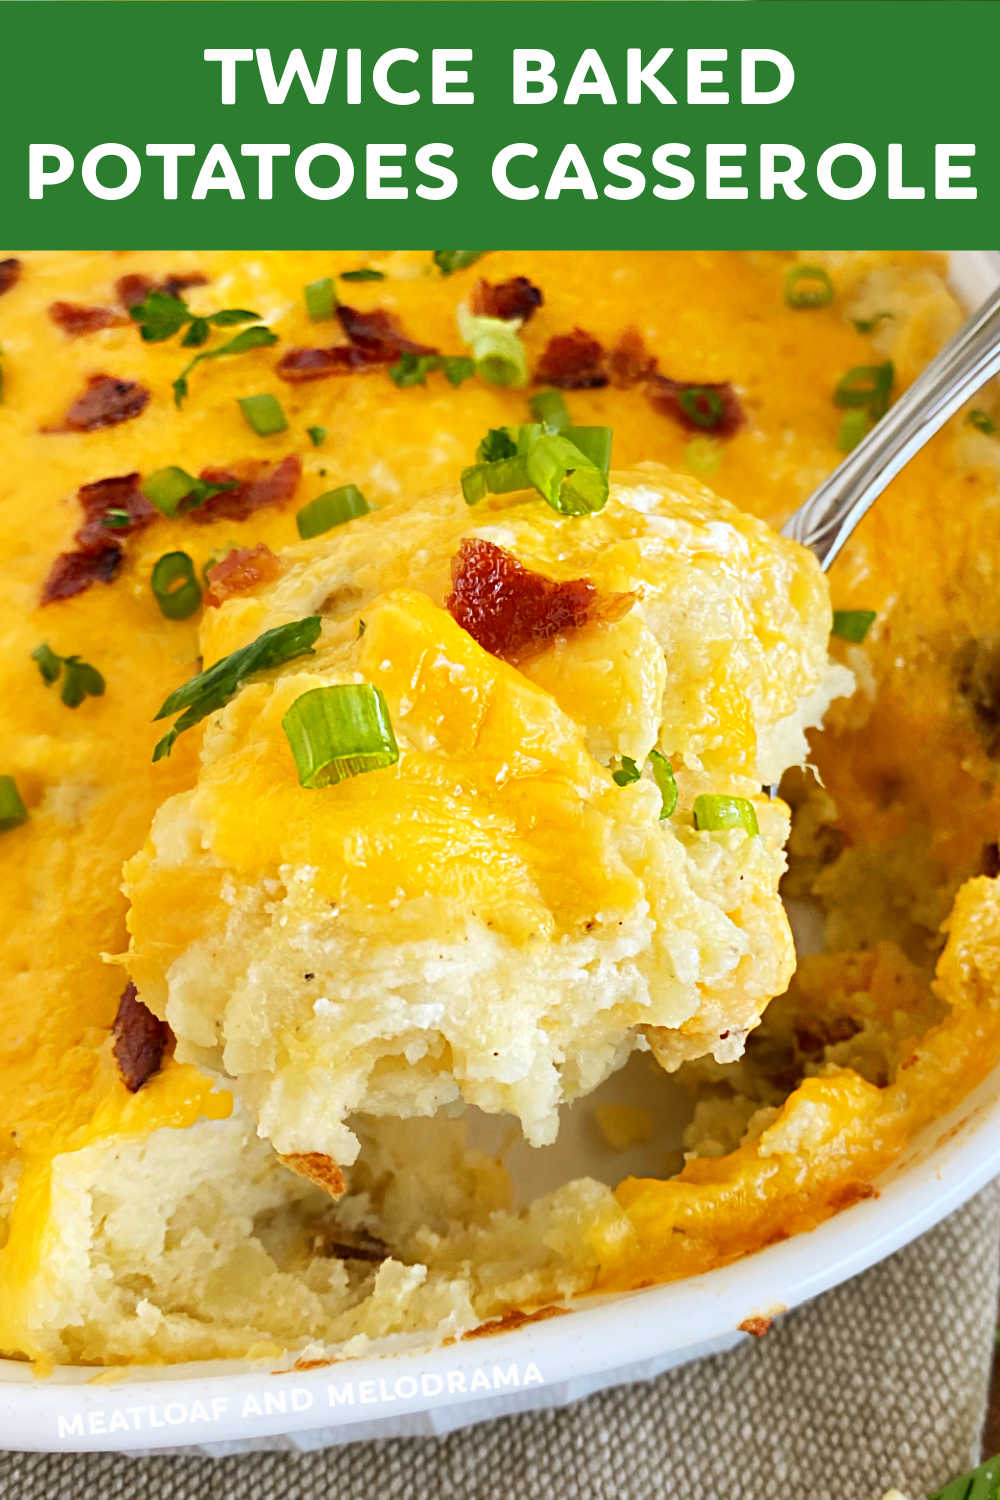 This Twice Baked Potatoes Casserole Recipe is an easy mashed potato side dish loaded with your favorite toppings. Perfect for holiday meals! This is the ultimate comfort food that complements almost any main dish! via @meamel